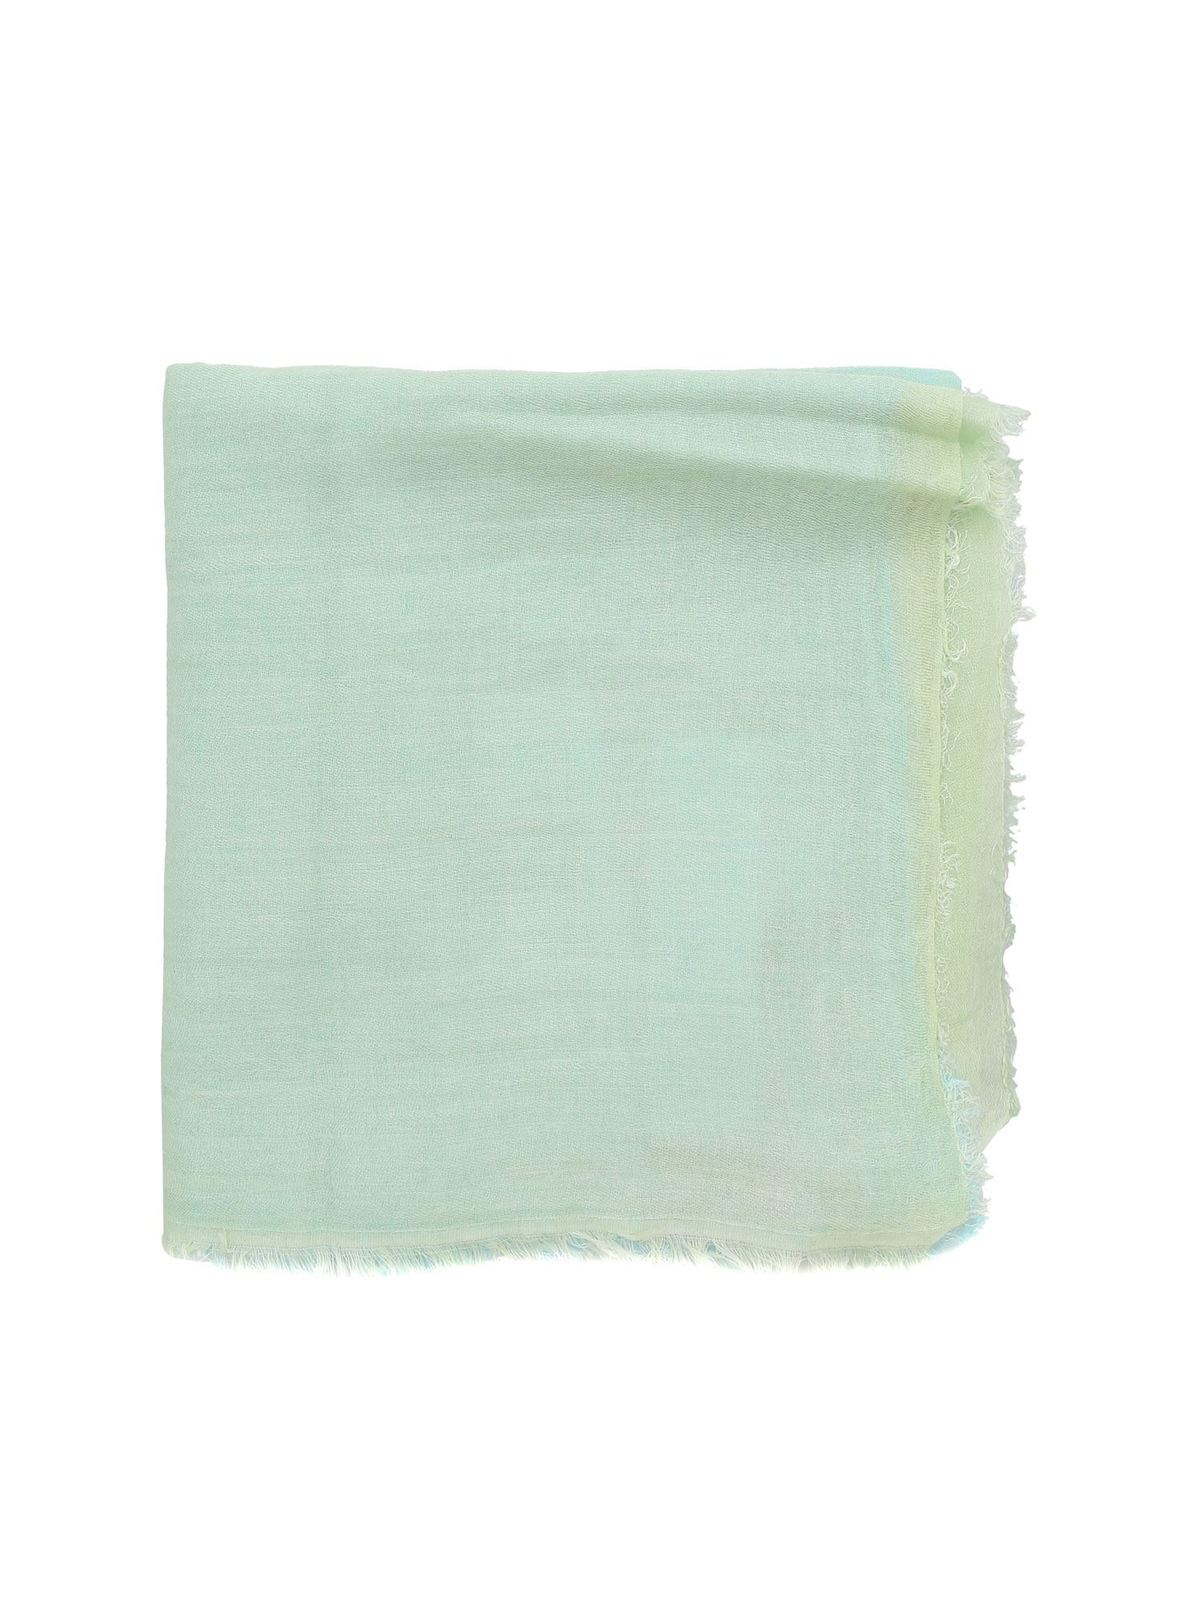 BE BLUMARINE GRADIENT SCARF IN GREEN AND TURQUOISE